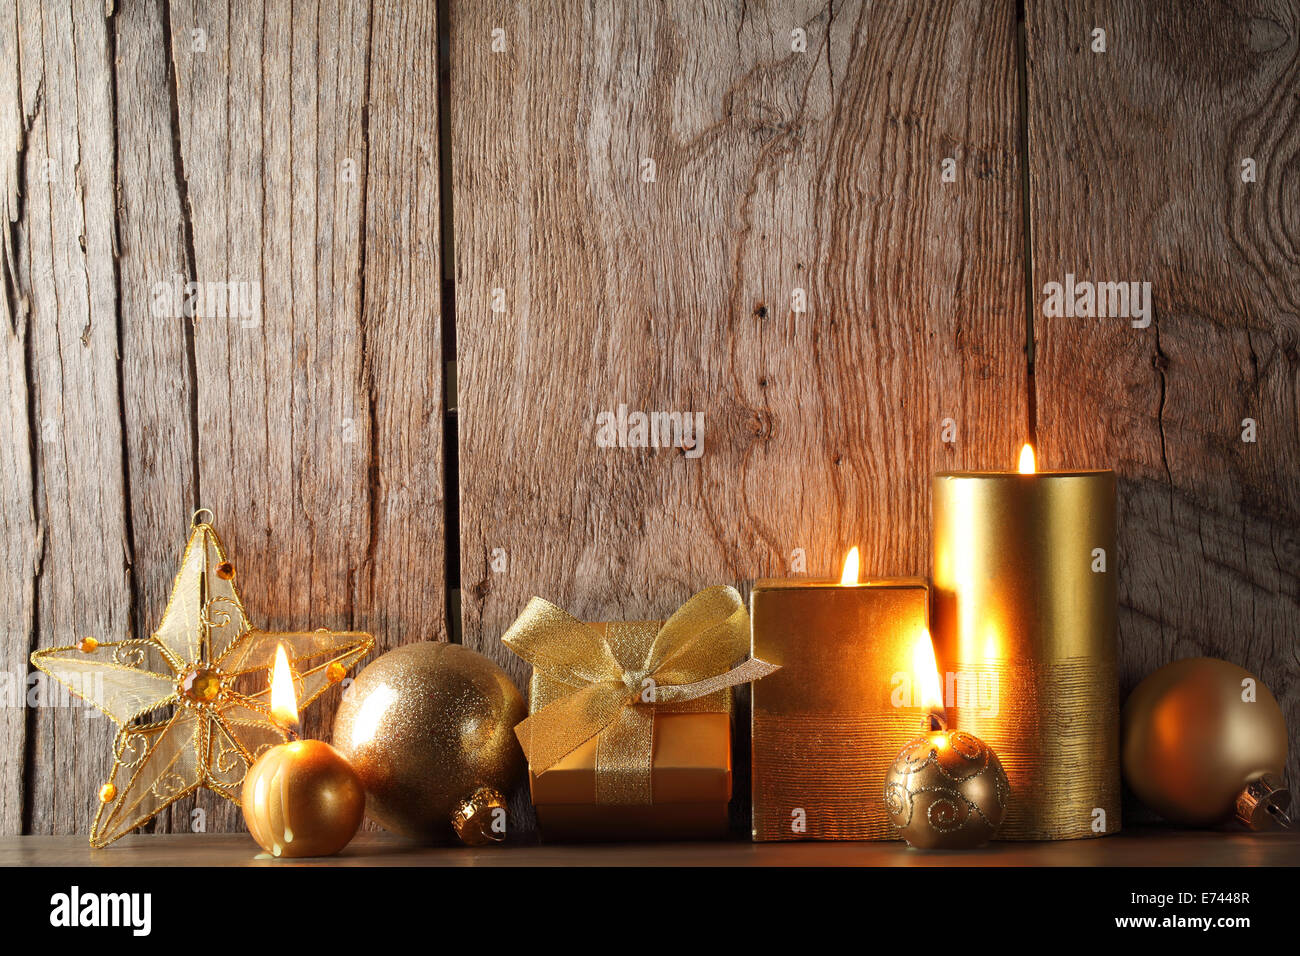 Grunge wood background with burning candles,gold balls and star. Stock Photo